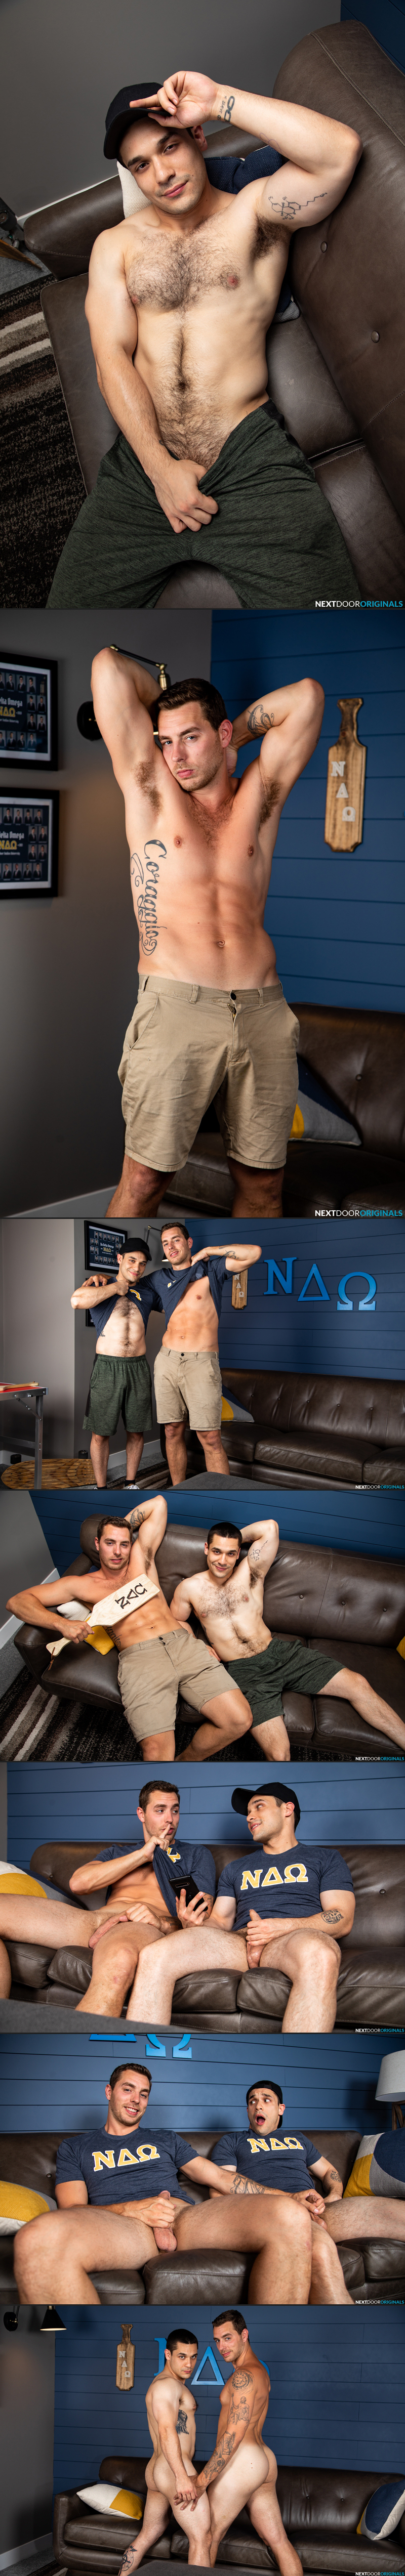 Fraternity Fantasies: Not A Word (Carter Woods and Andrew Miller) at Next Door Studios